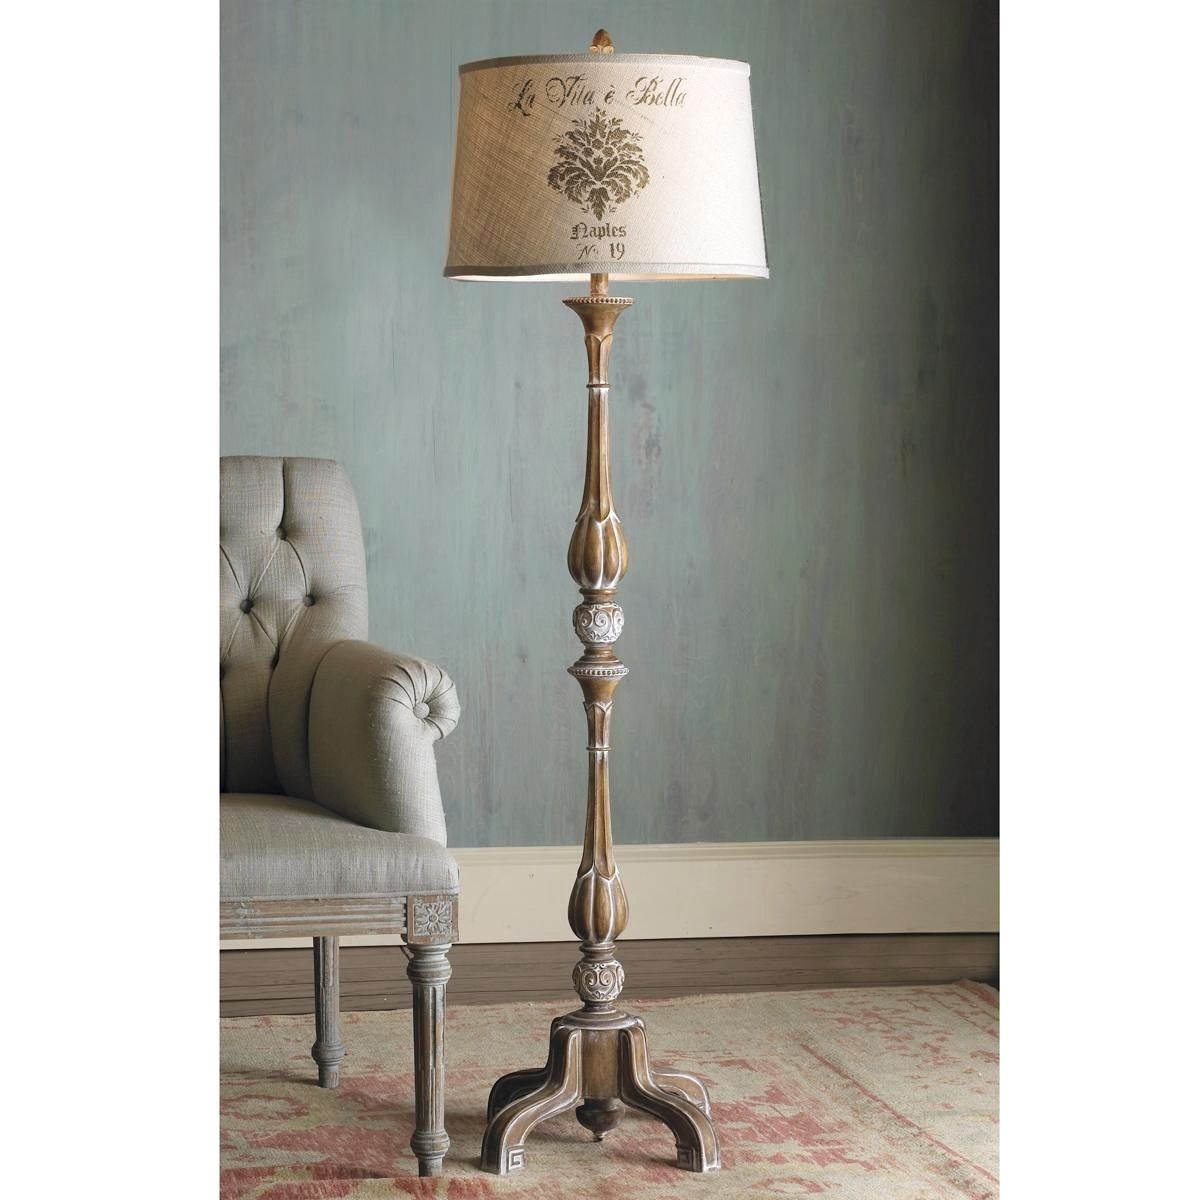 Coolest French Country Table Lamps Decorating Ideas | Kapelire Pertaining To Country Living Room Table Lamps (View 6 of 15)